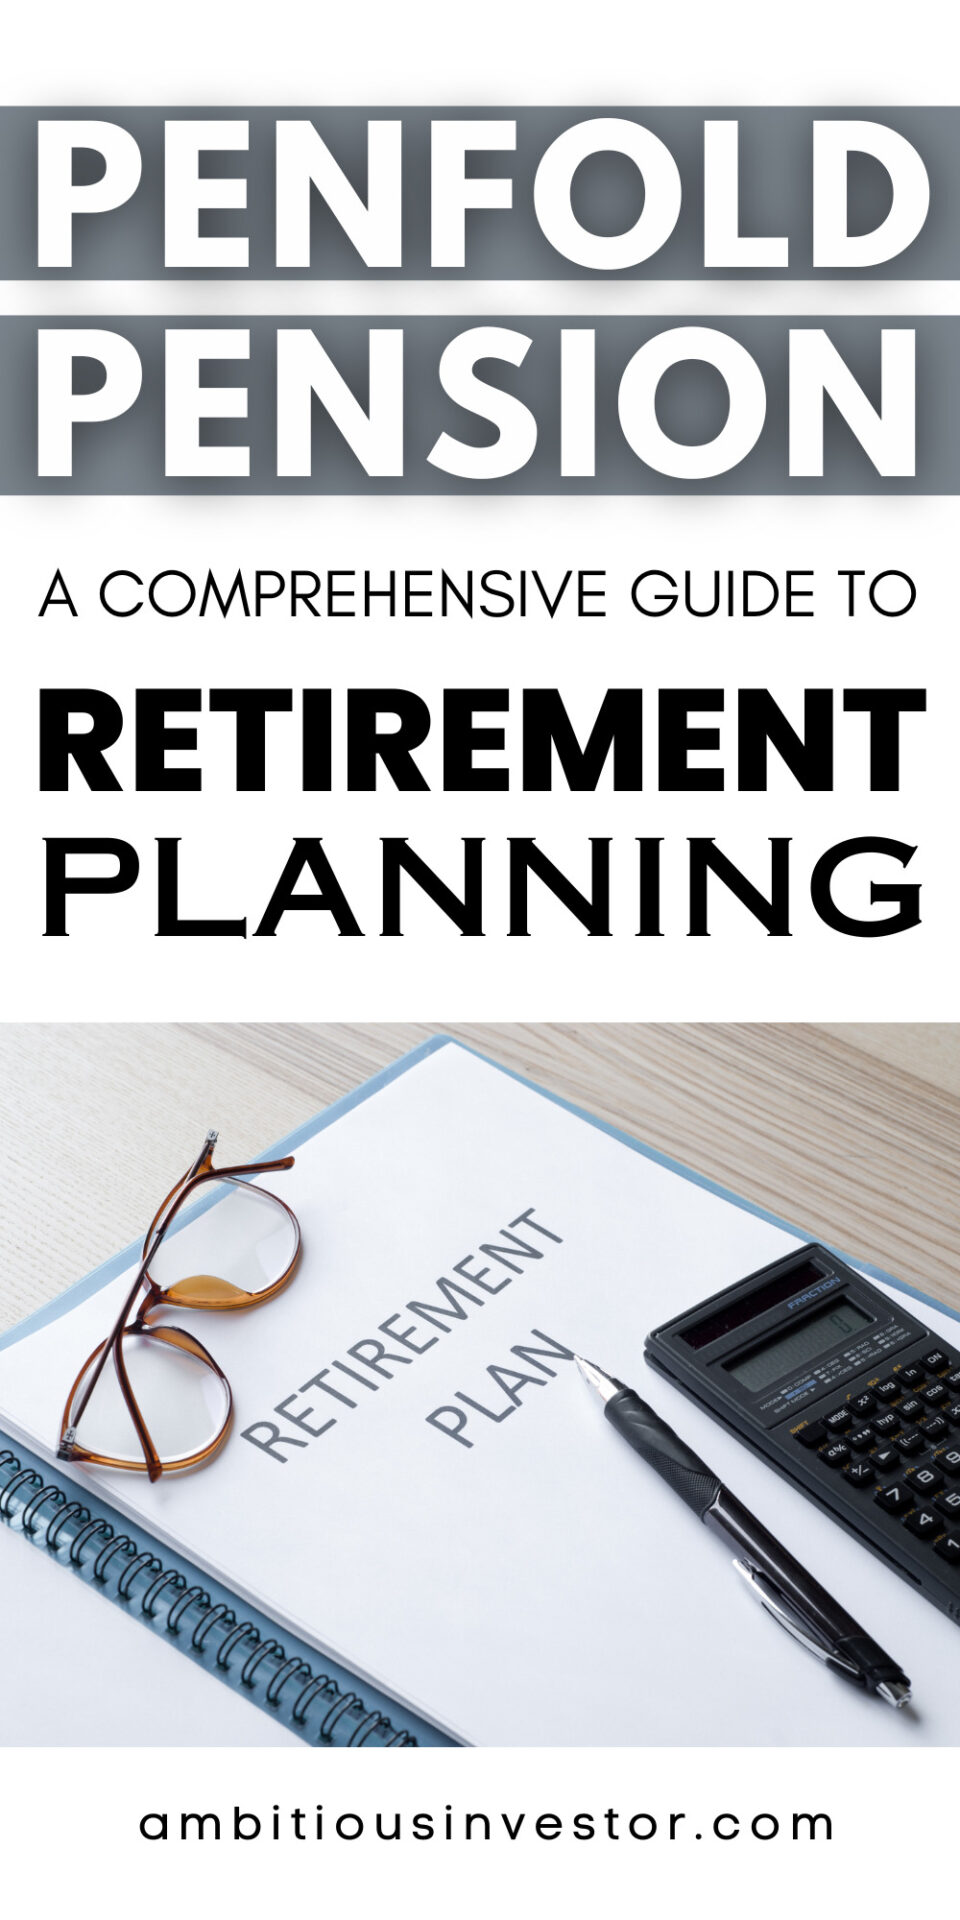 Penfold Pension: A Comprehensive Guide to Retirement Planning 